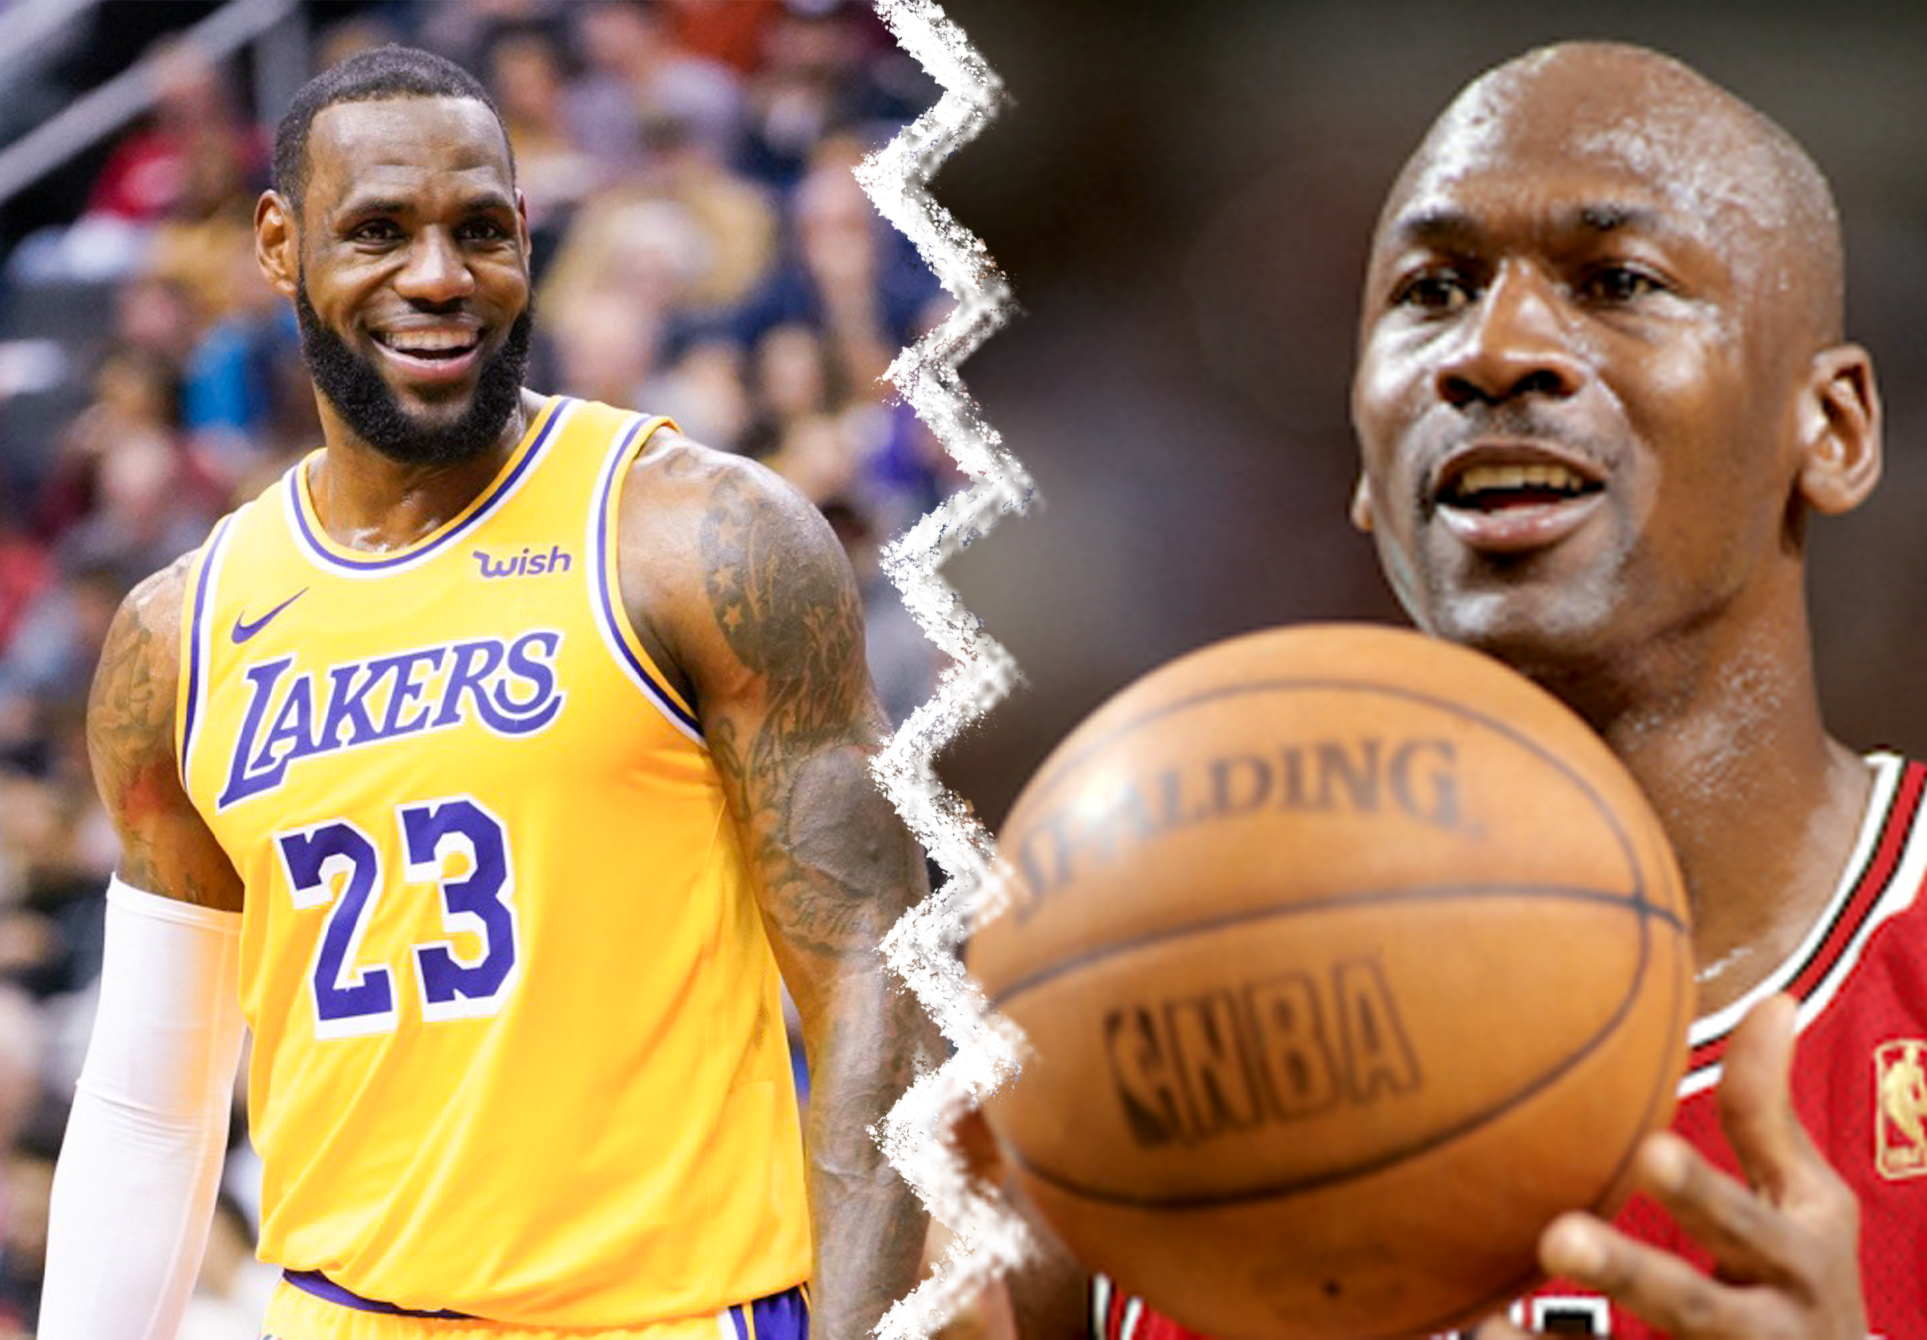 Why LeBron James Gets the Nod Over Michael Jordan And Kobe Bryant